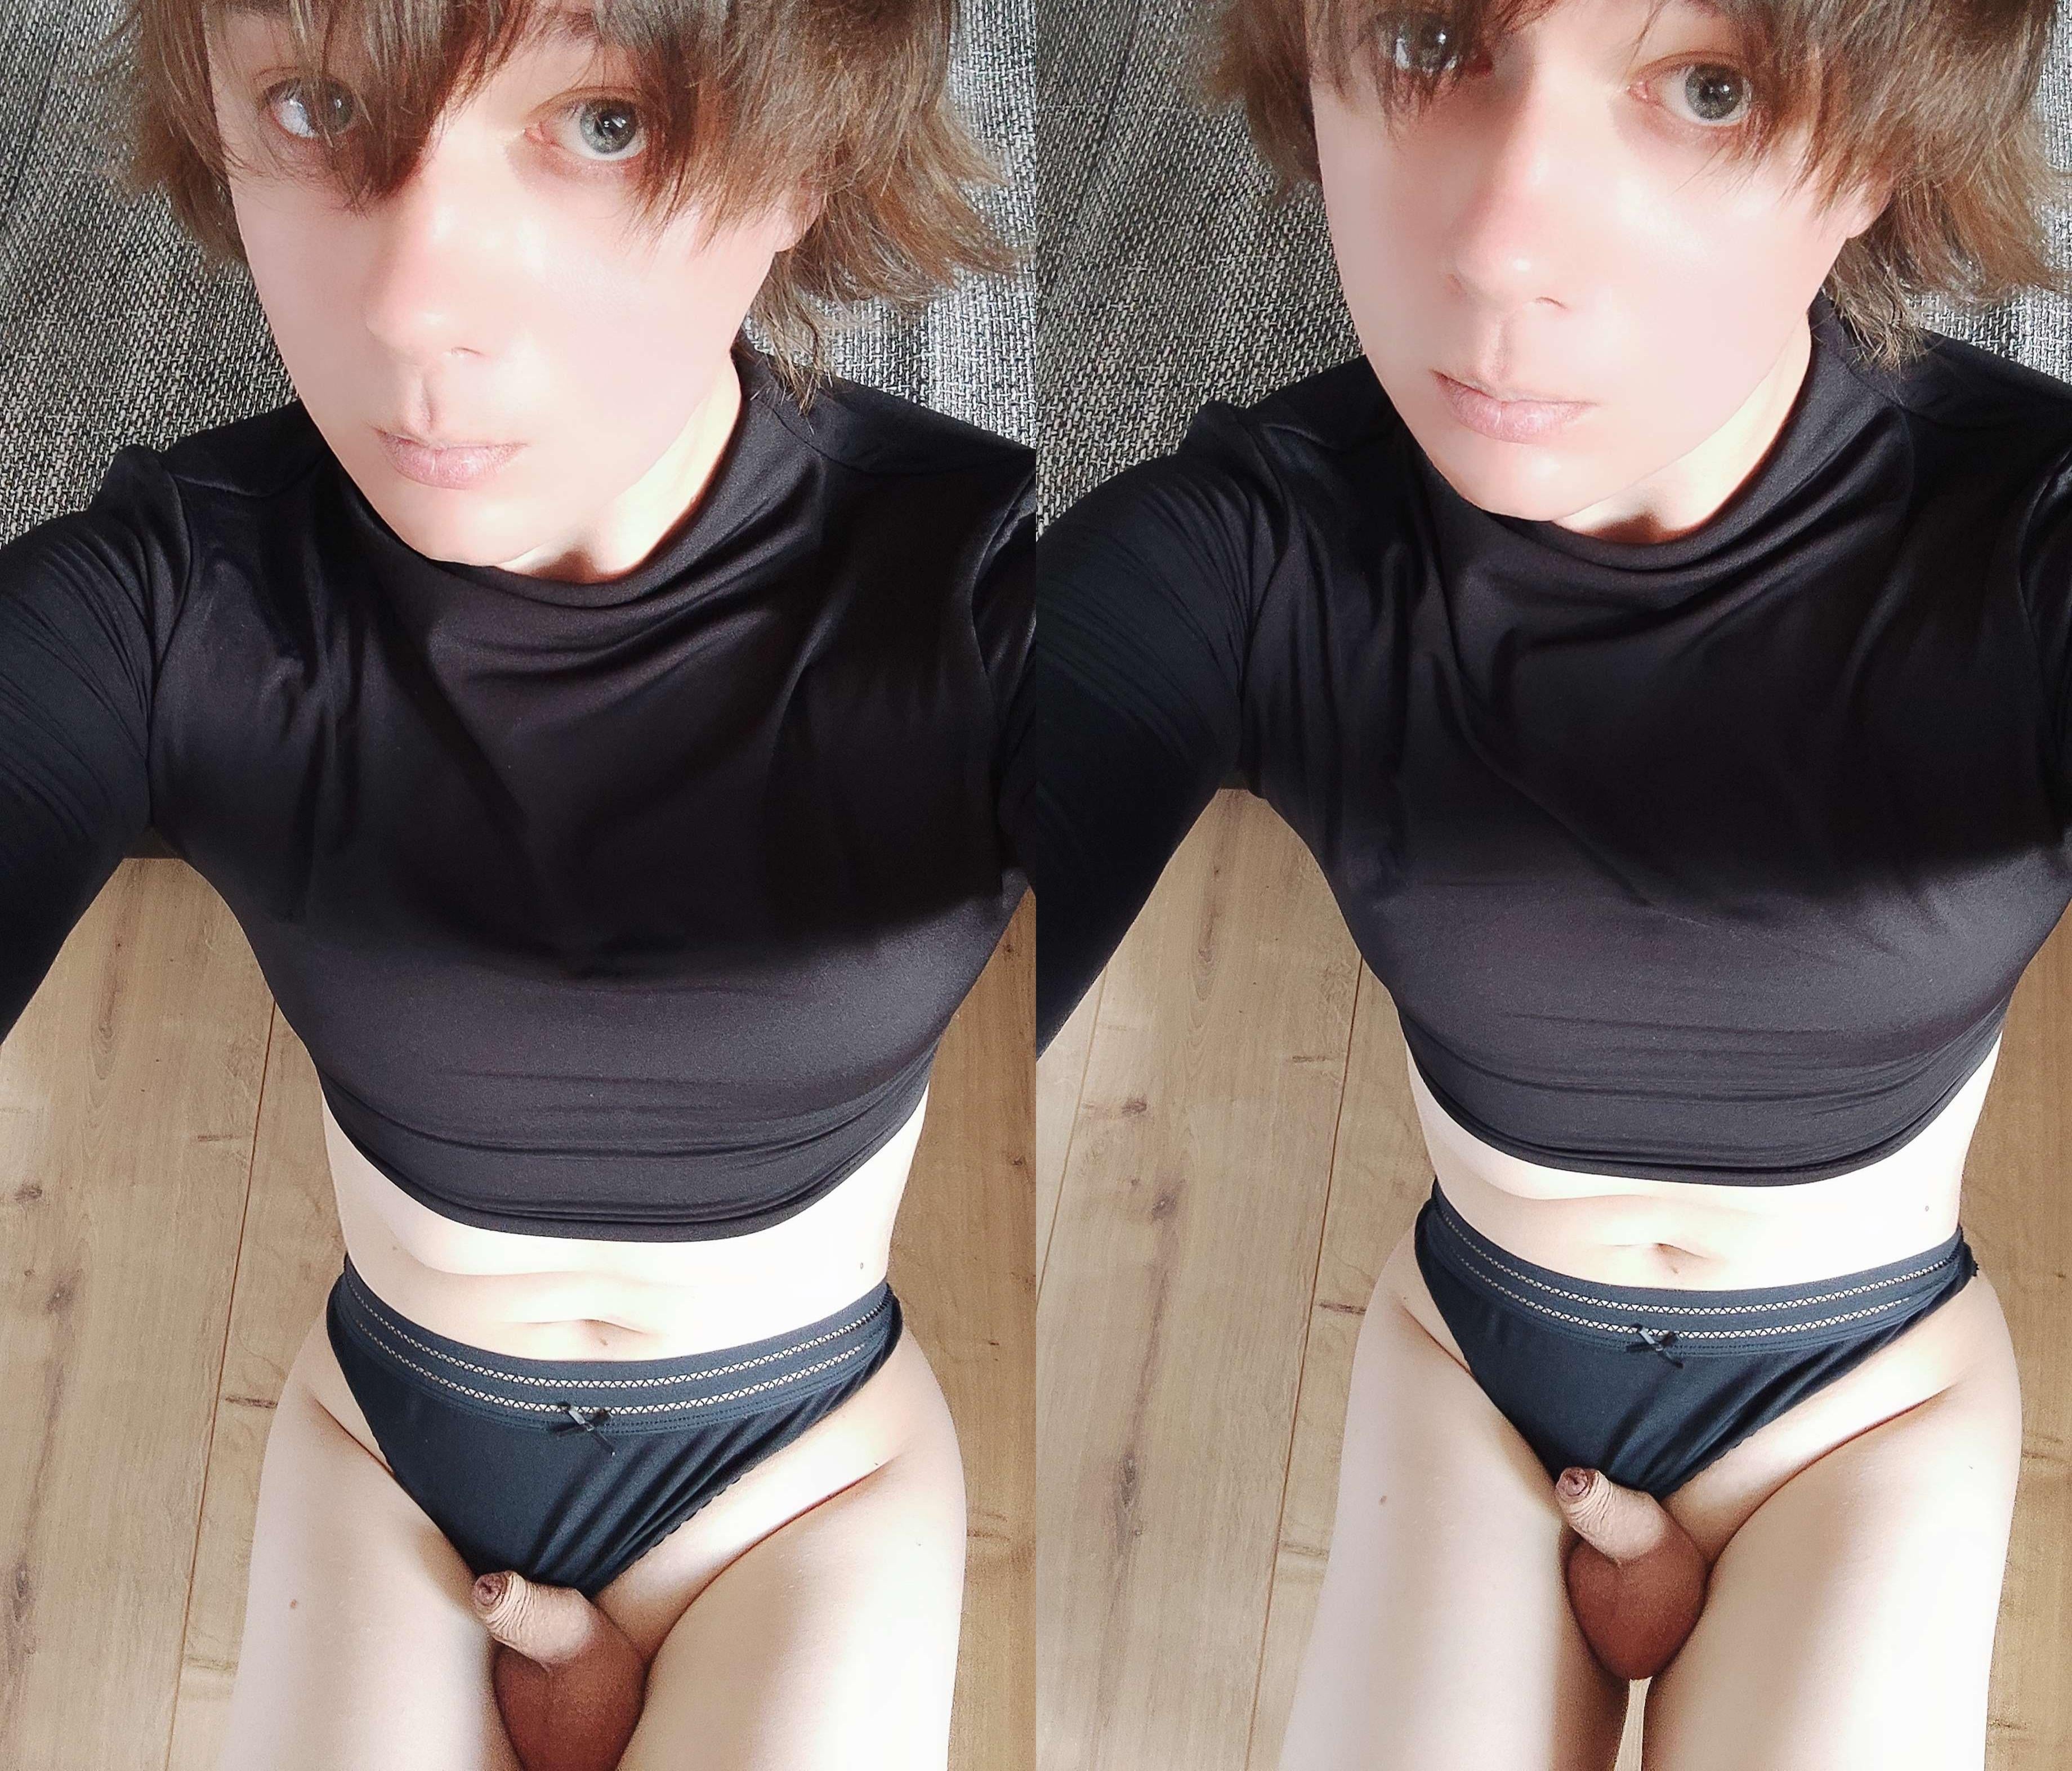 I feel so ashamed when big dick guys see my little pp🙈🤏🏻 And I think you know that I love when you fuck my face roughly🤤💦 That doesn't make me gay, right?😳💞 105m9sk - transexual woman